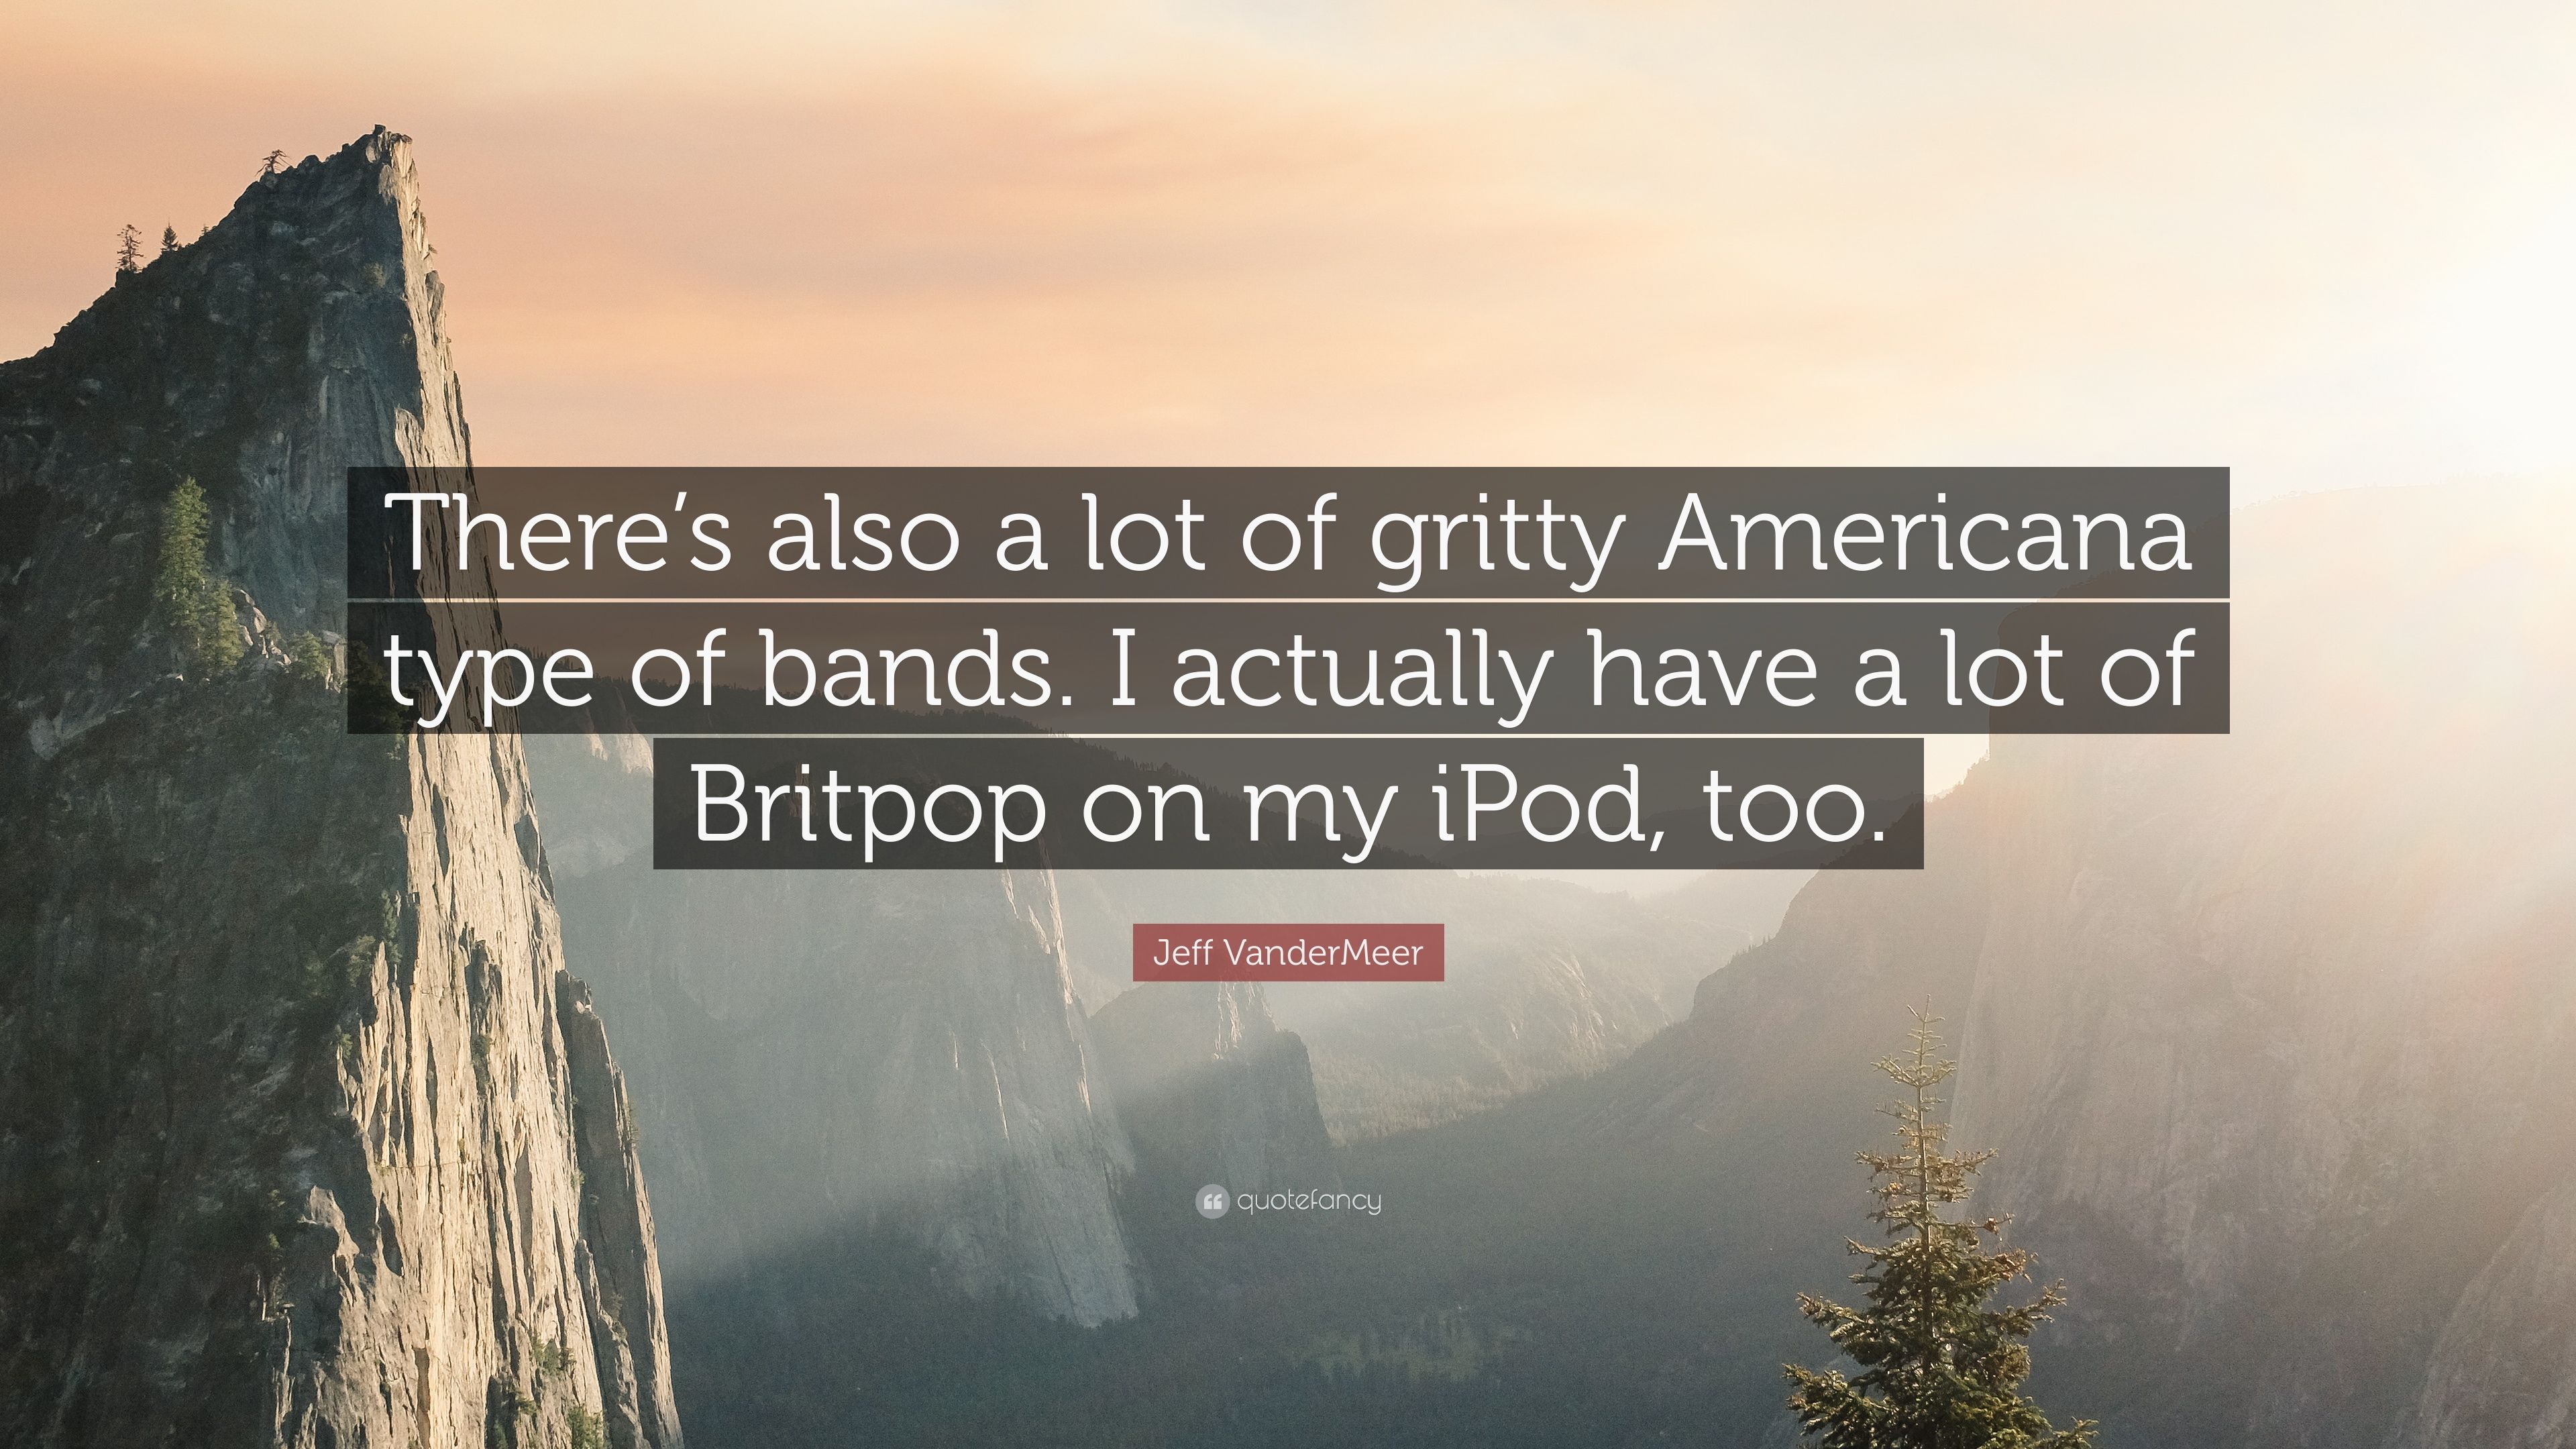 Jeff VanderMeer Quote: “There's also a lot of gritty Americana